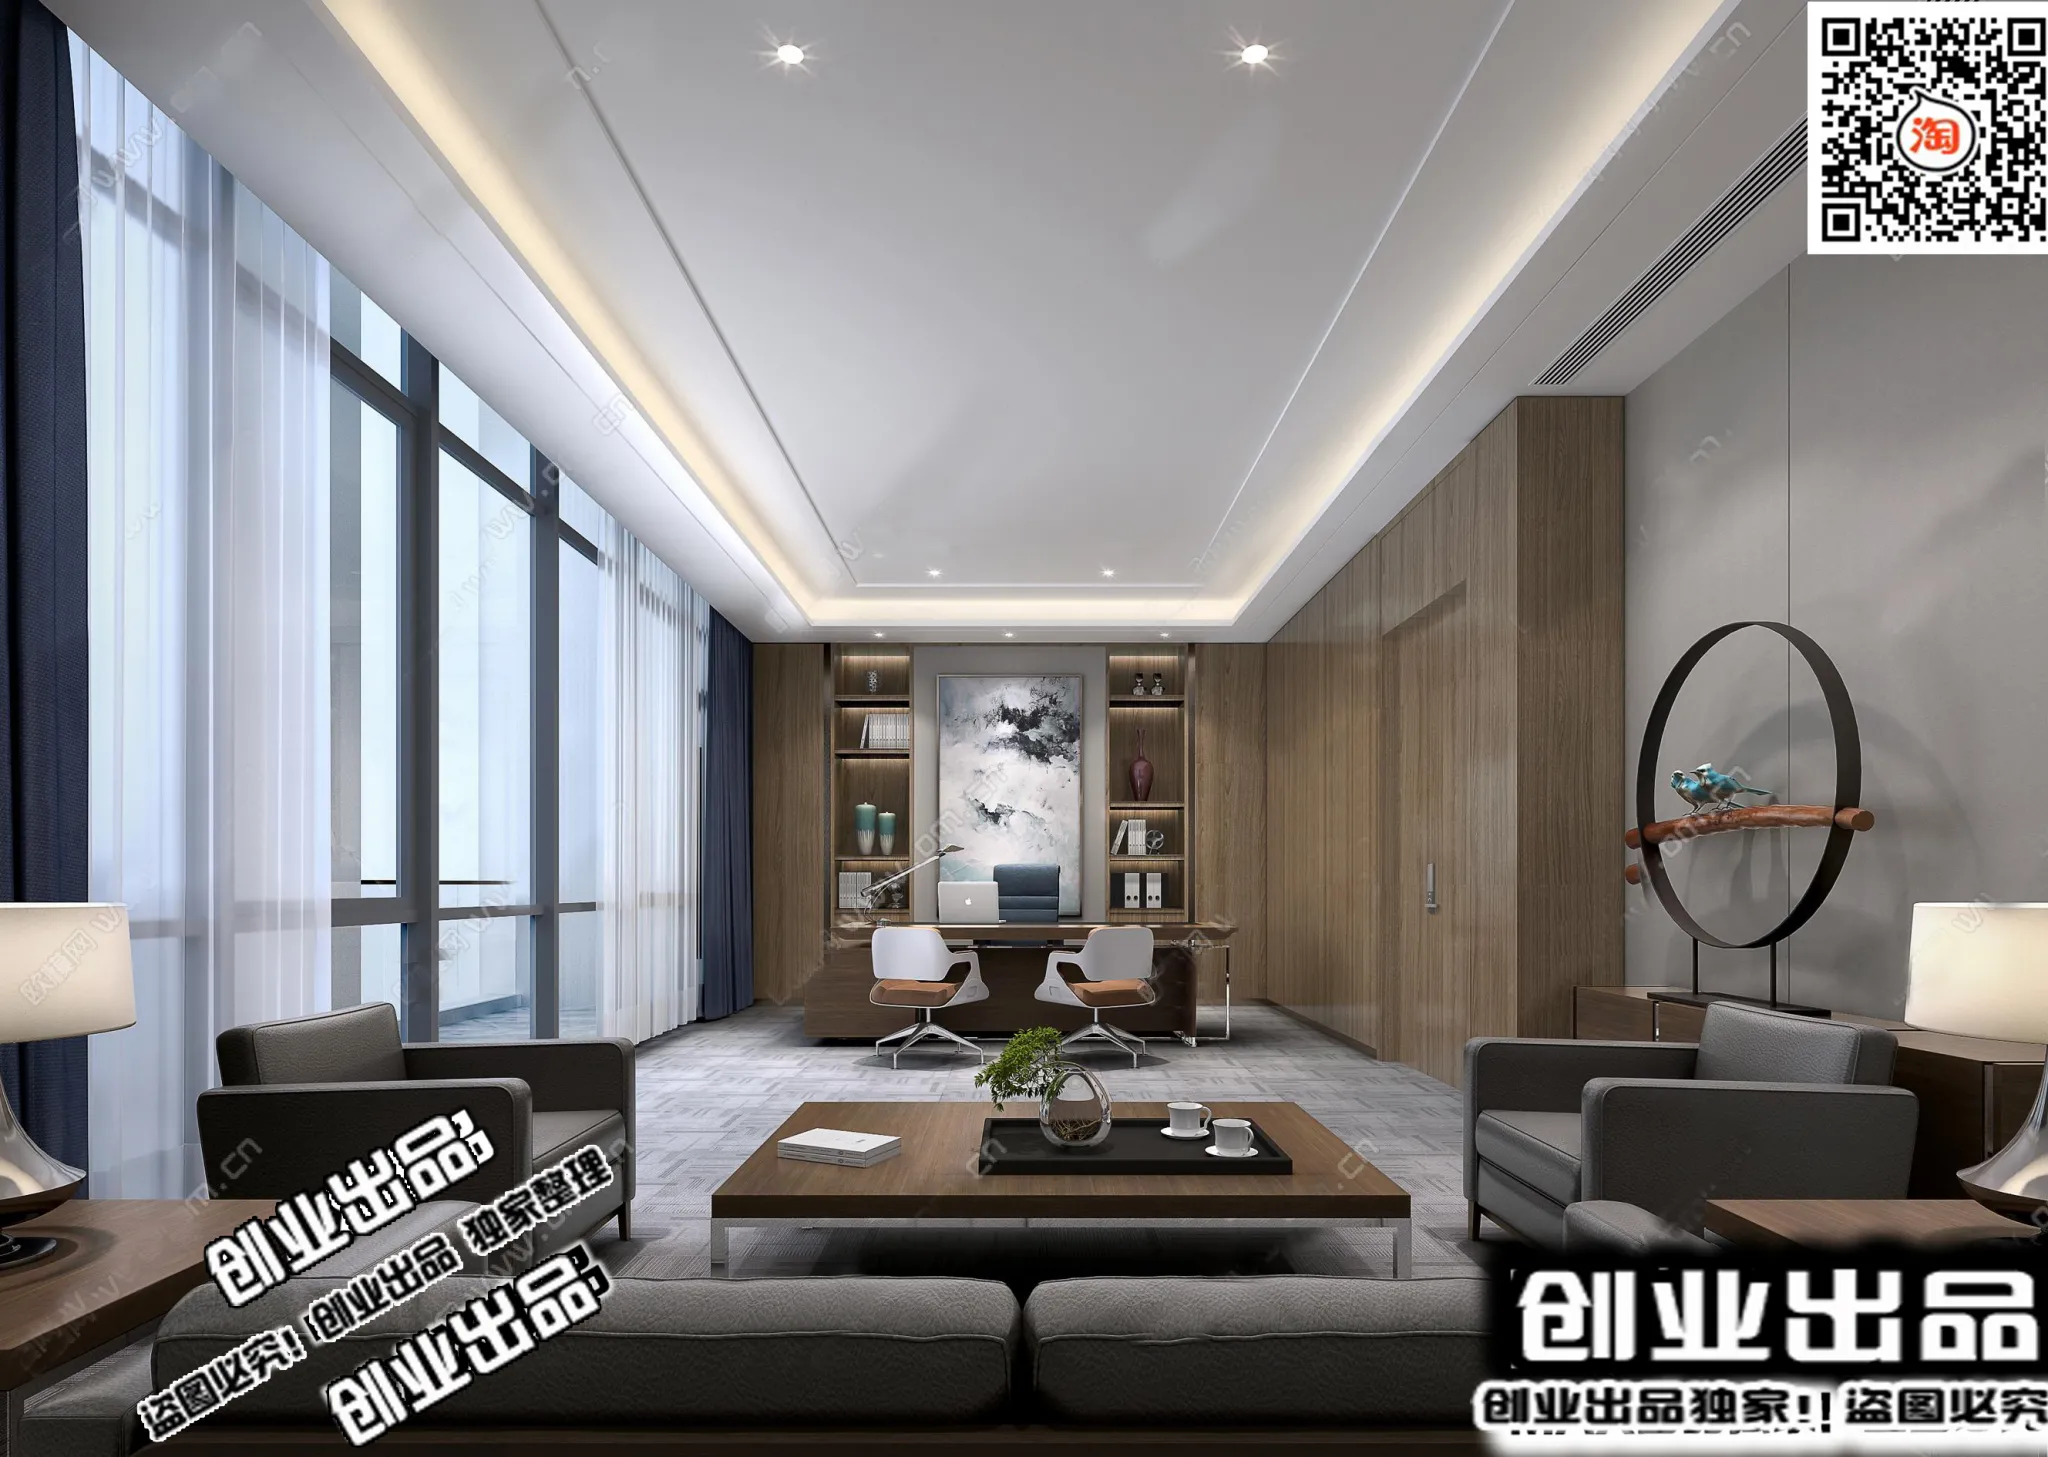 3D OFFICE INTERIOR (VRAY) – MANAGER ROOM 3D SCENES – 132